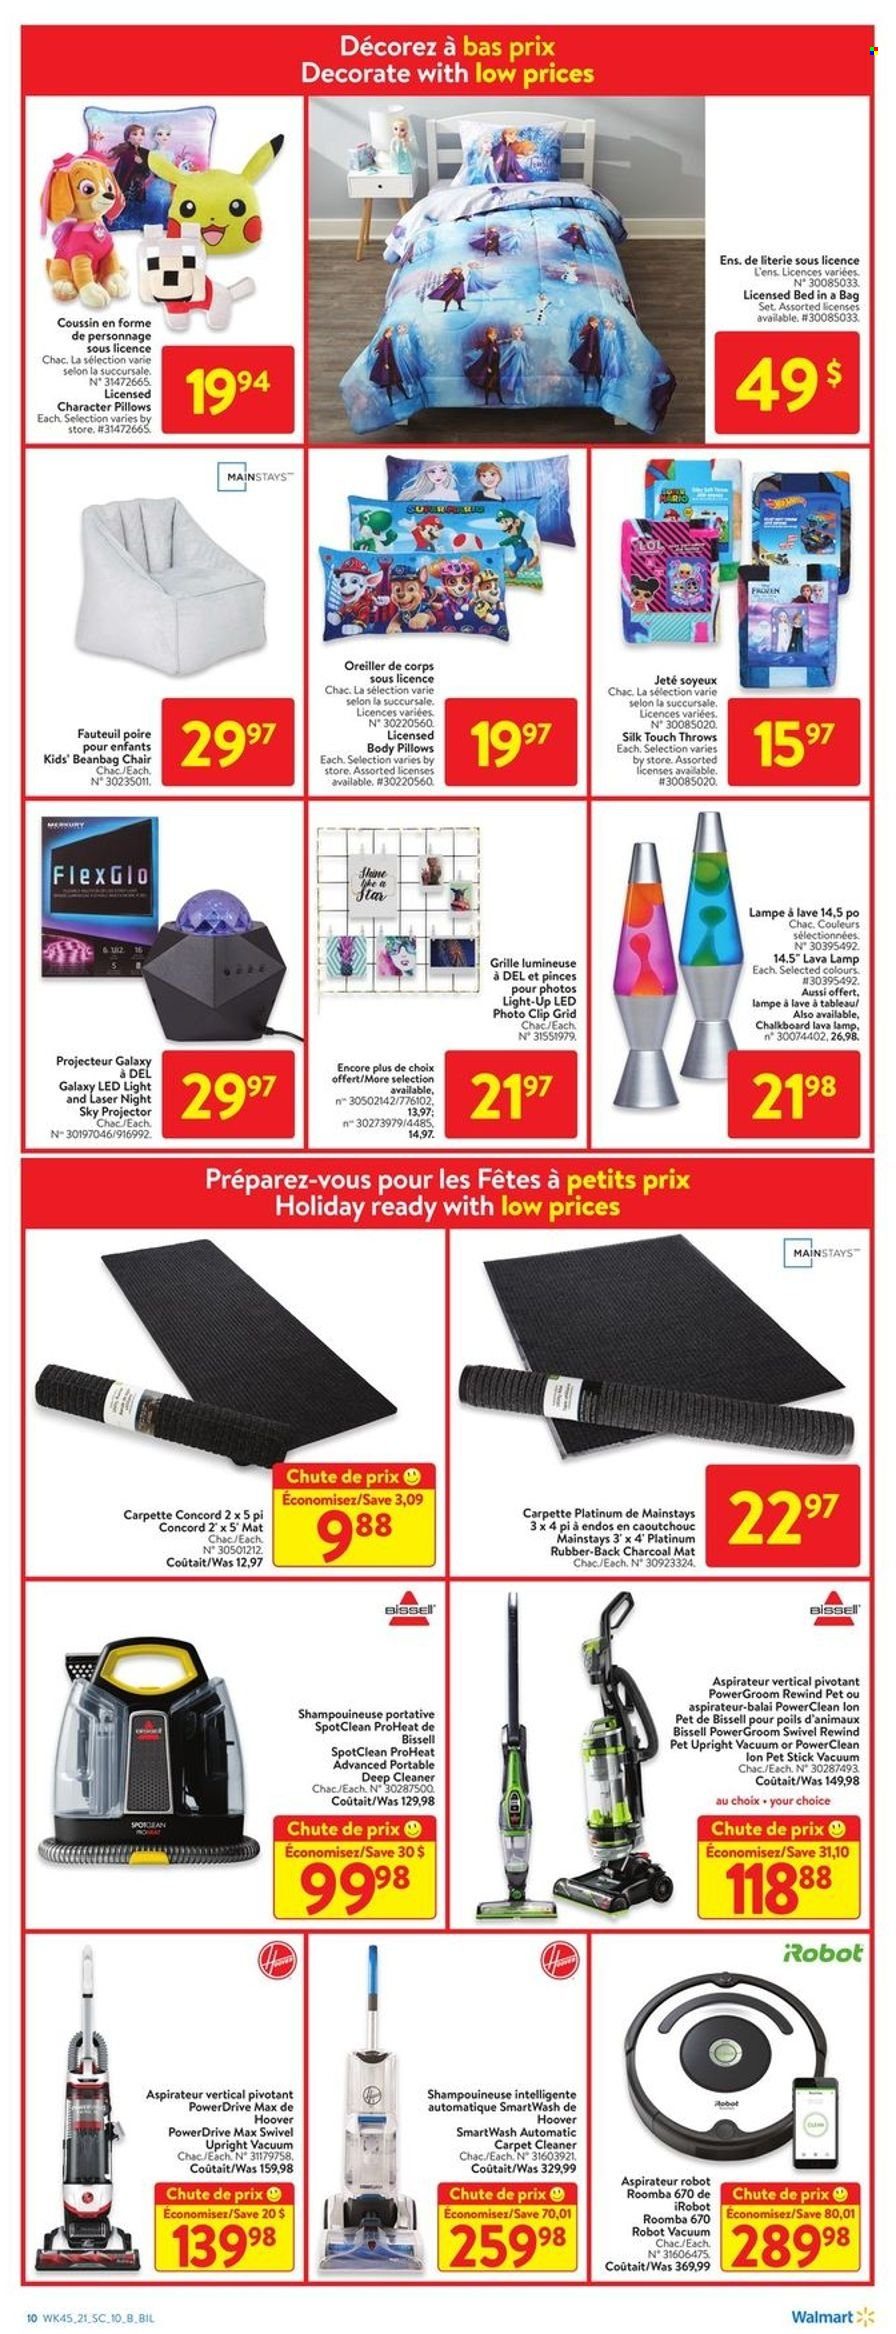 thumbnail - Walmart Flyer - December 02, 2021 - December 08, 2021 - Sales products - Samsung Galaxy, Silk, cleaner, chalkboard, eraser, pillow, Samsung Galaxy A, projector, Bissell, Roomba, robot vacuum, chair, bed, lamp, LED light, iRobot. Page 25.